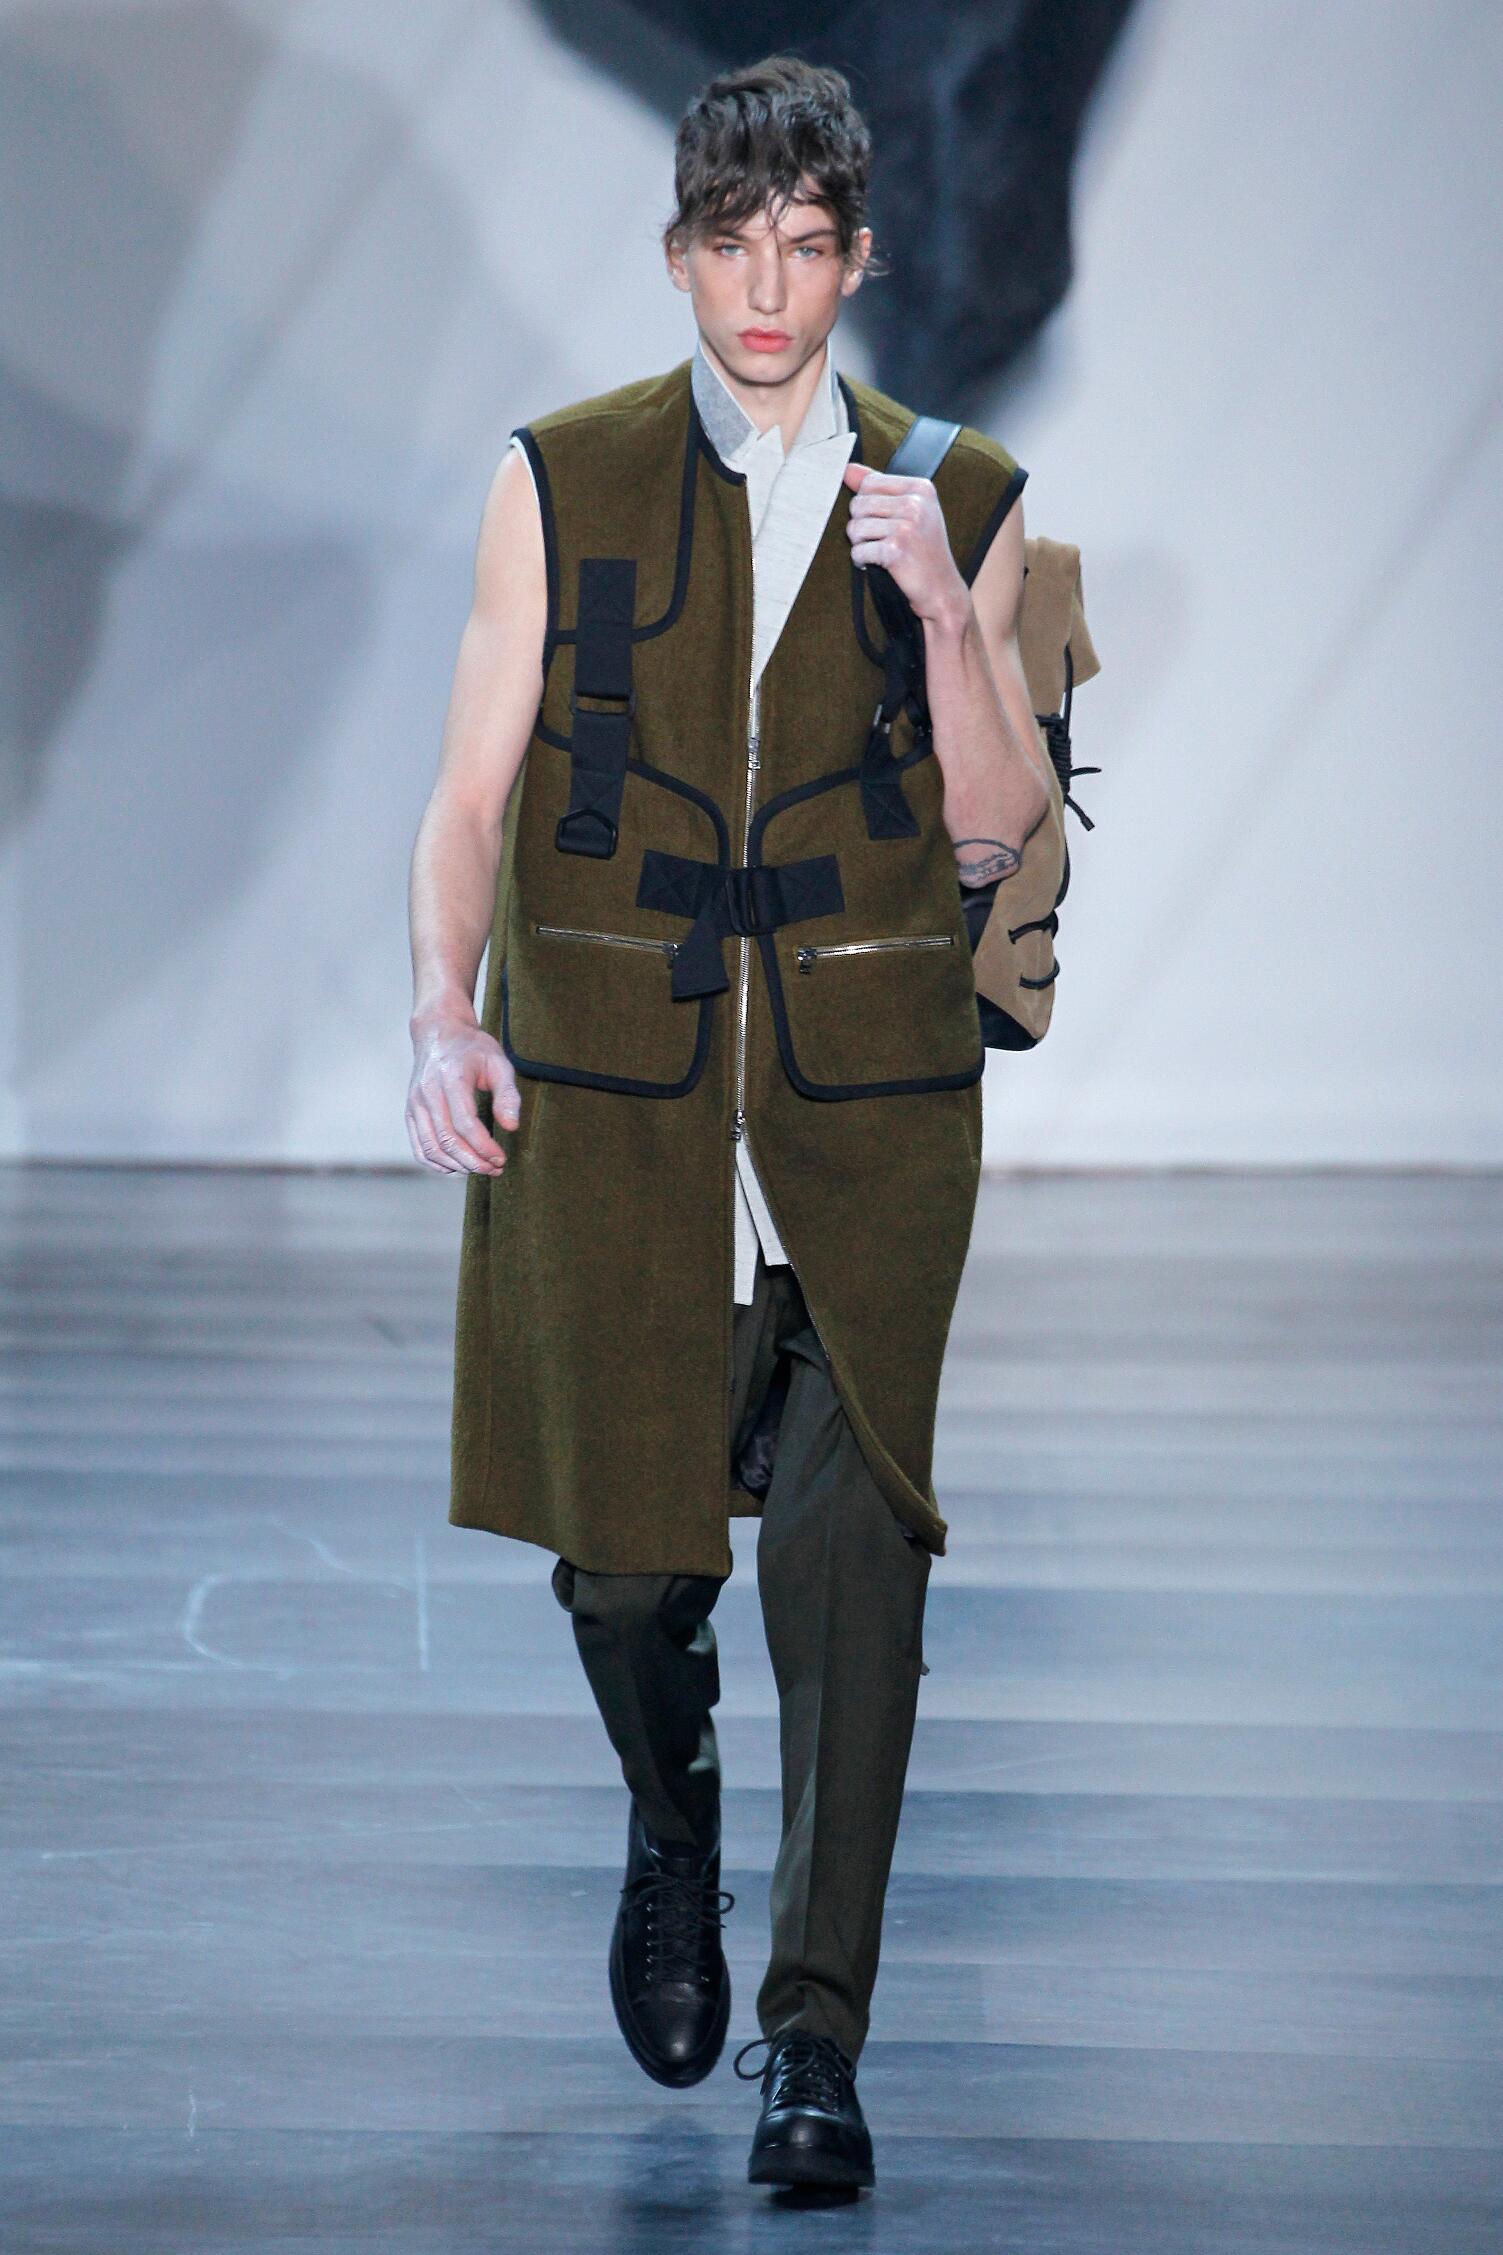 3.1 PHILLIP LIM FALL WINTER 2015-16 MEN’S COLLECTION | The Skinny Beep